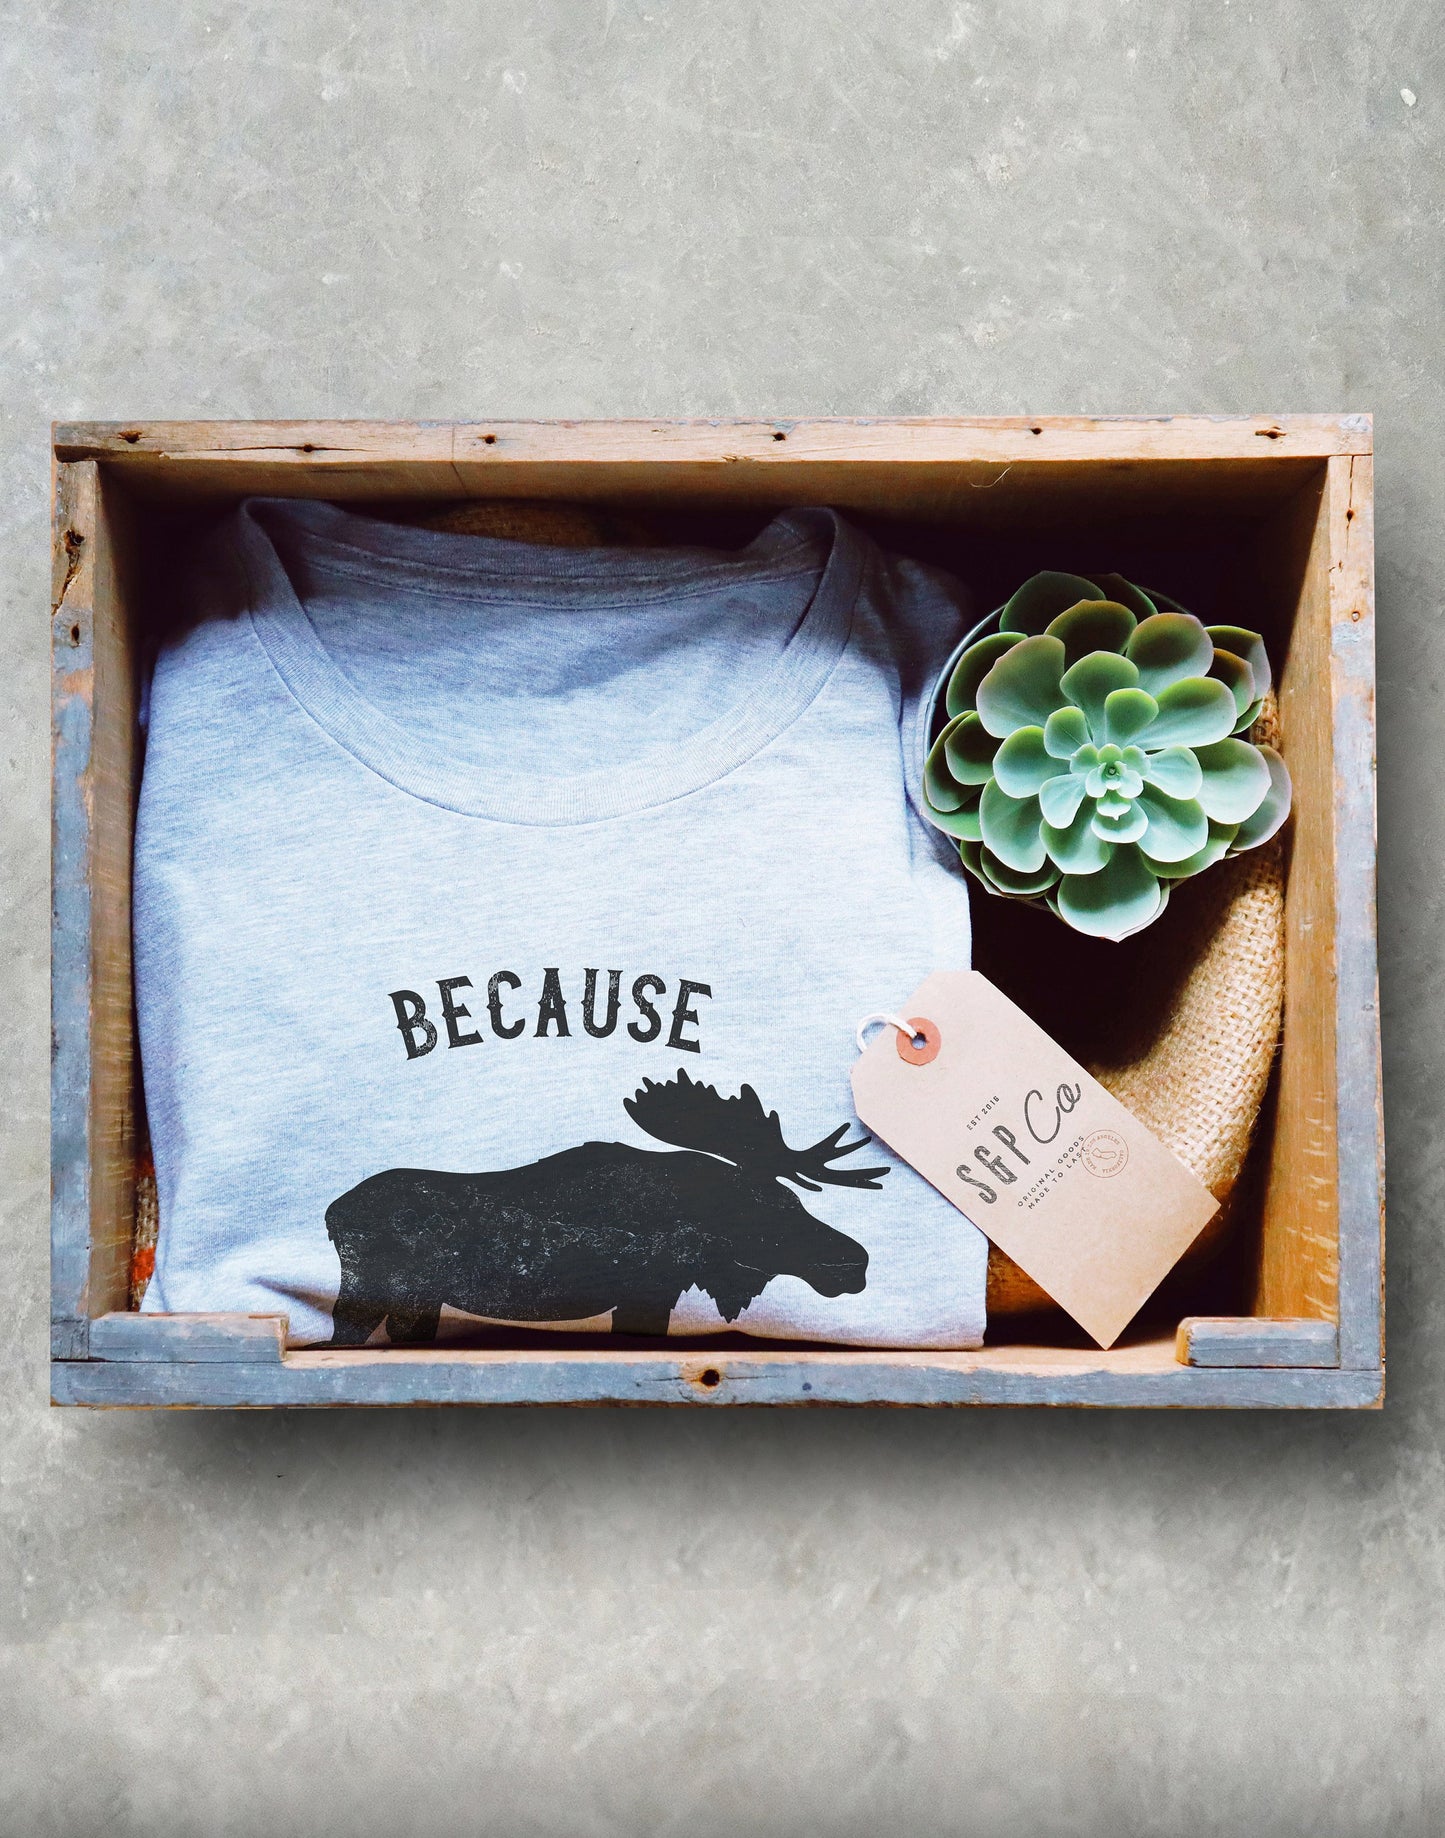 Because Moose Are Freakin’ Awesome Unisex Shirt